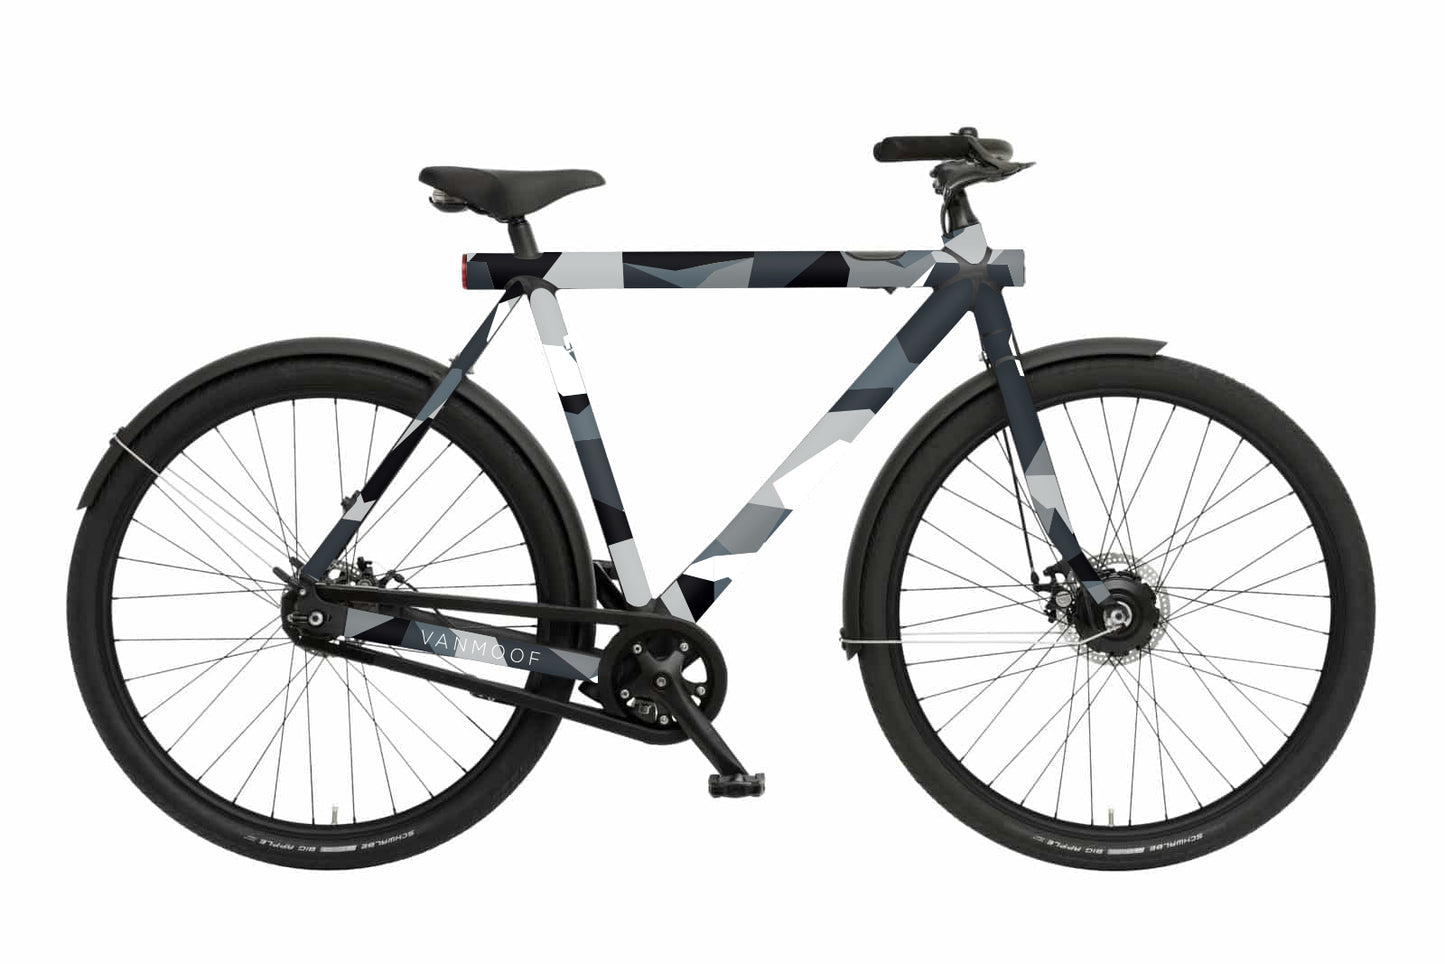 GREY CAMO PROTECT KIT FOR VANMOOF S ELECTRIFIED